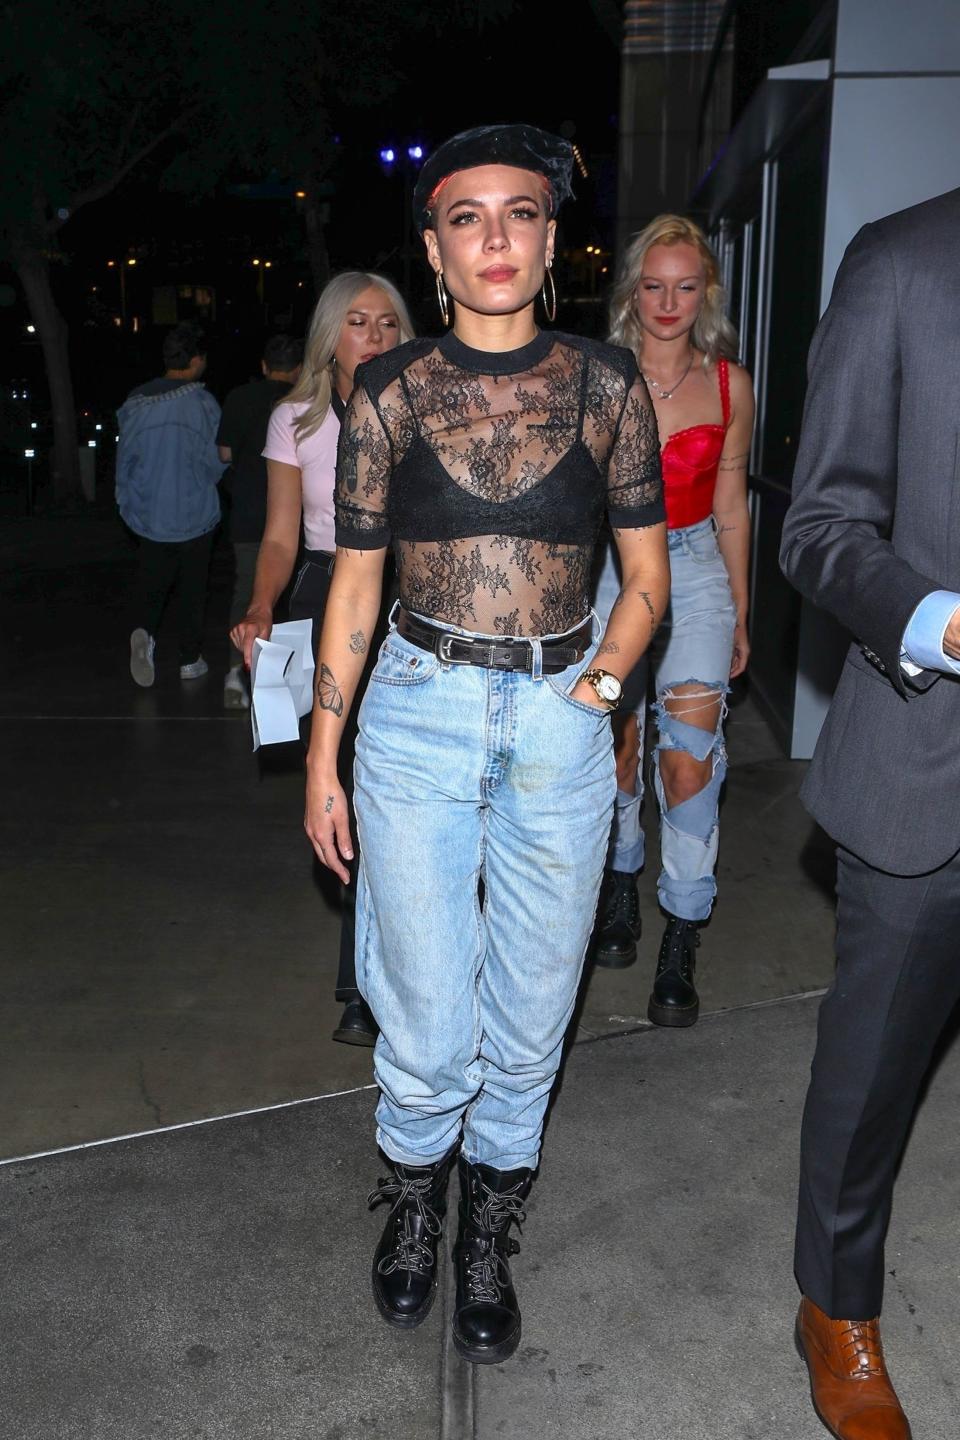 Los Angeles, CA  - Halsey arrives to Aubrey and the Migos concert at the Staples Center in Los Angeles, CA. The Singer looks stylish as she walks into the venue wearing a see through lace shirt, baggy jeans, and leather boots.Pictured: HalseyBACKGRID USA 12 OCTOBER 2018 USA: +1 310 798 9111 / usasales@backgrid.comUK: +44 208 344 2007 / uksales@backgrid.comUK Clients - Pictures Containing ChildrenPlease Pixelate Face Prior To Publication